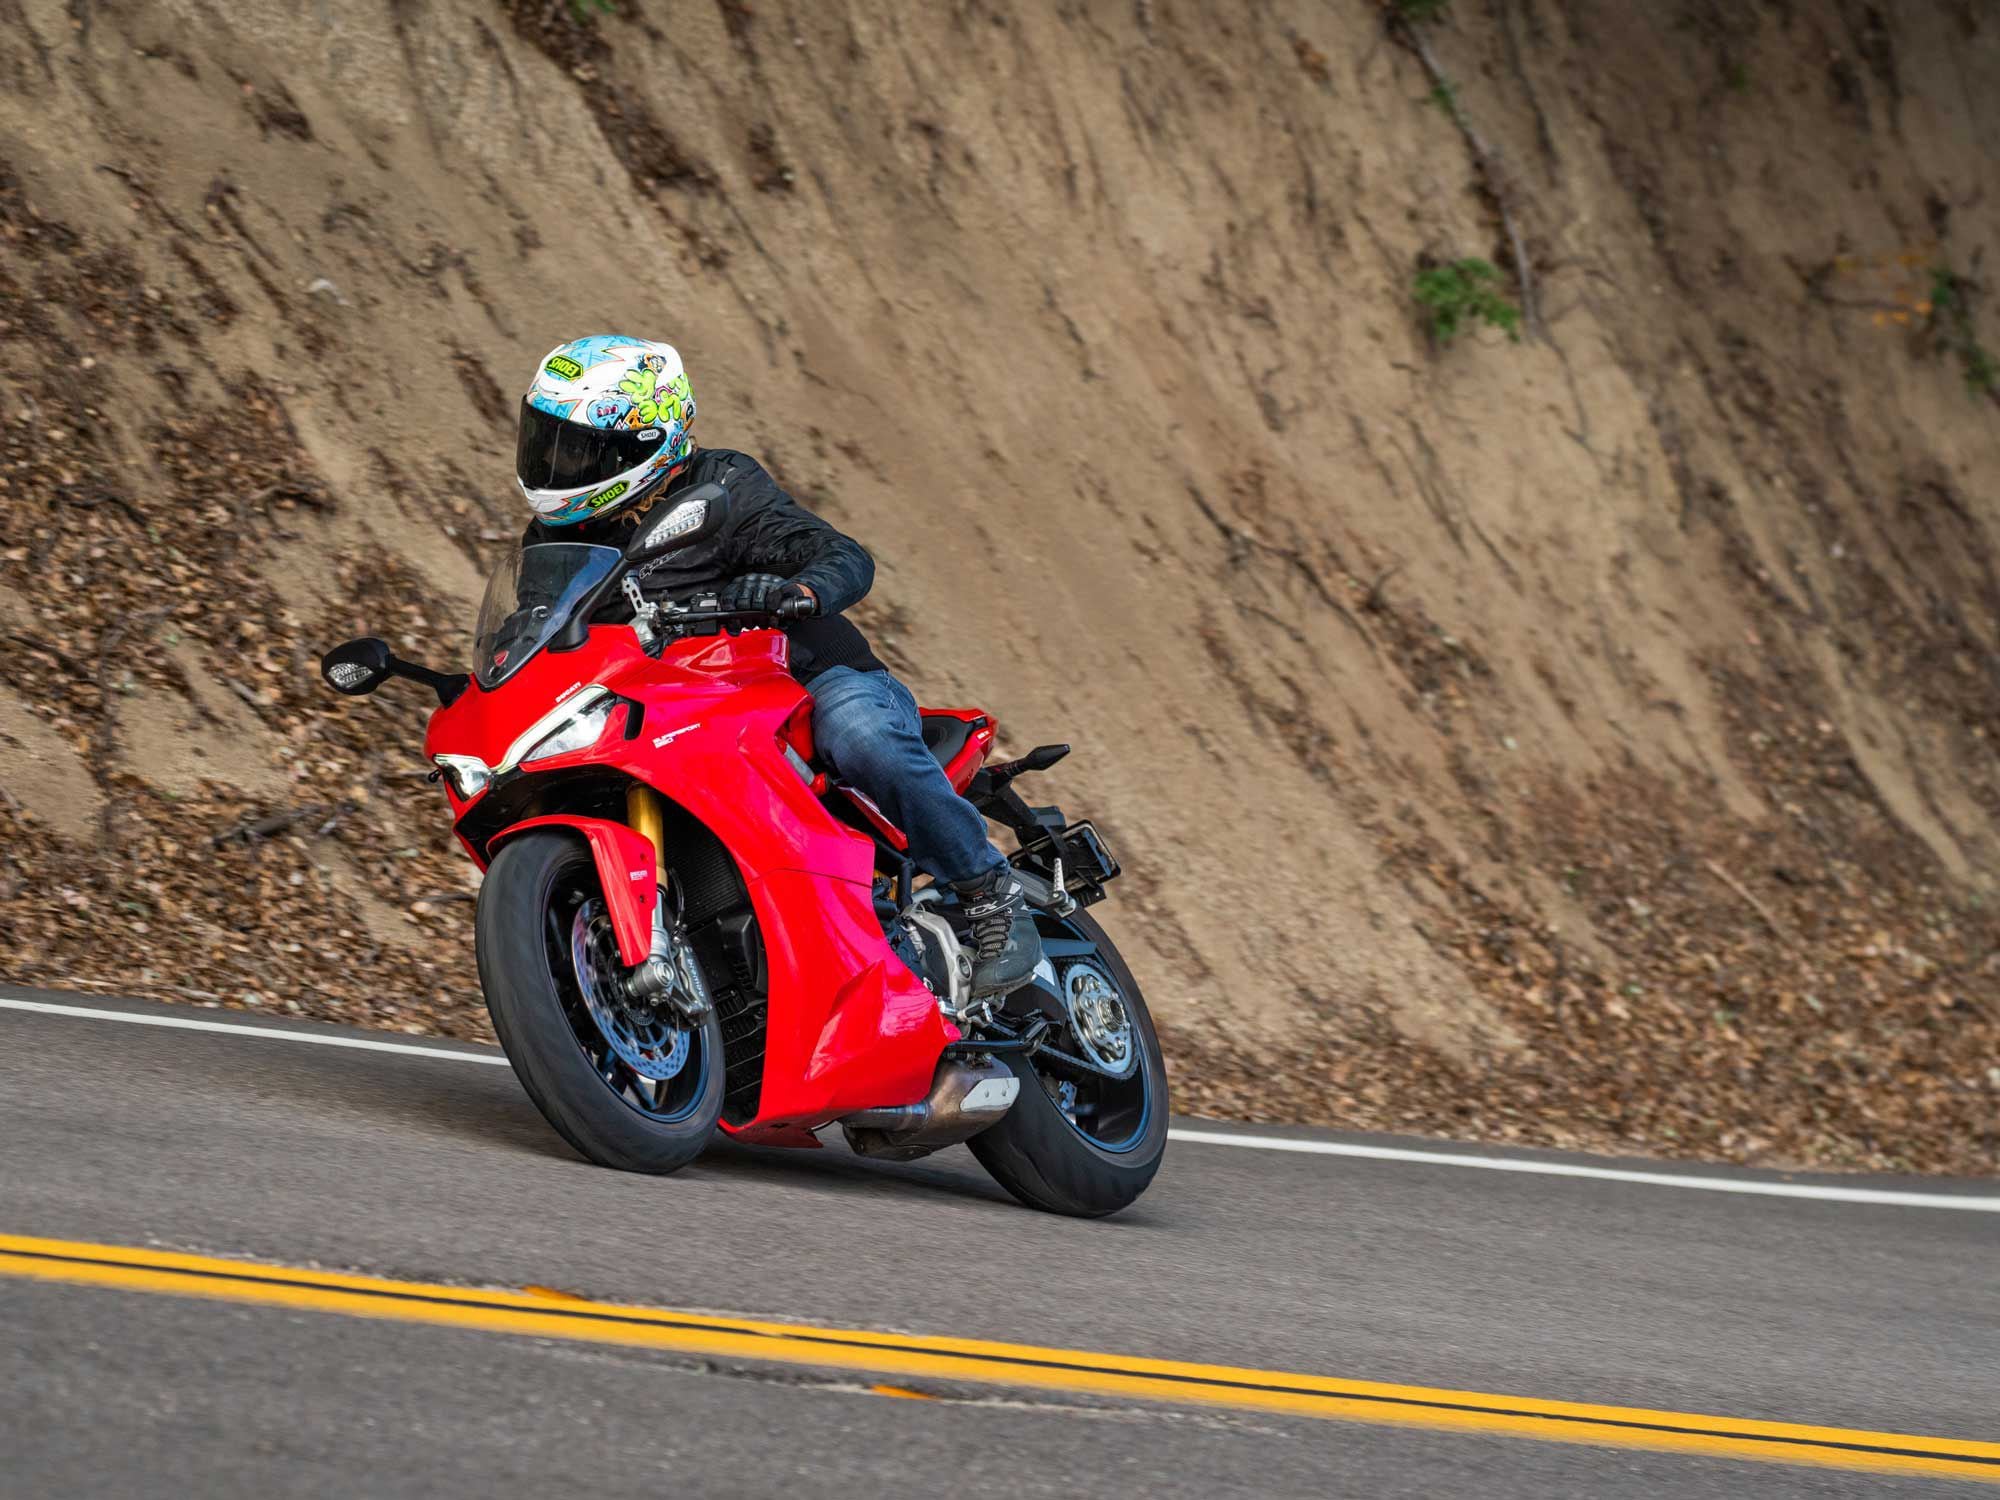 The SuperSport impresses with its light and responsive handling.